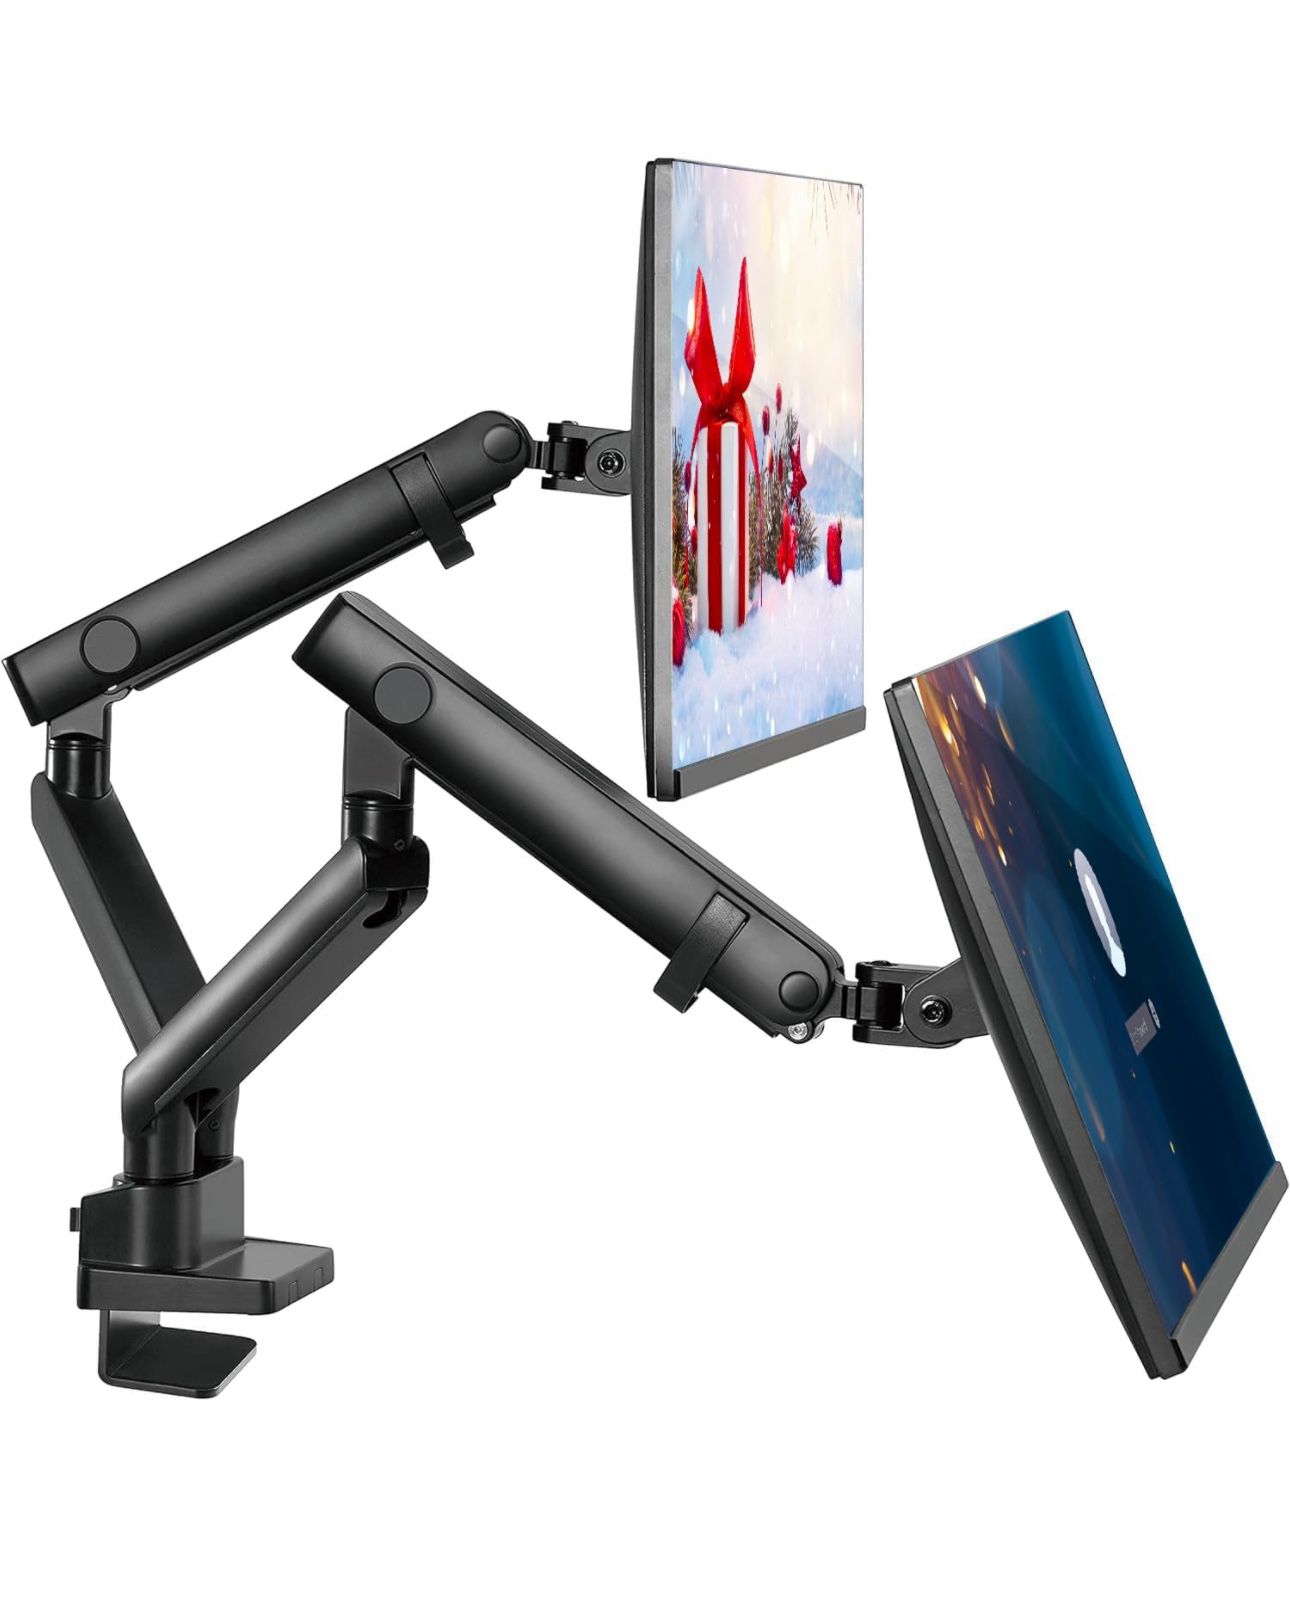 Quarx Dual Monitor Arm, Dual Monitor Mount, Dual Monitor Desk Mount up to 32 Inch Computer Screens, Dual Monitor Stand VESA Mount, Monitor Mount & Mon